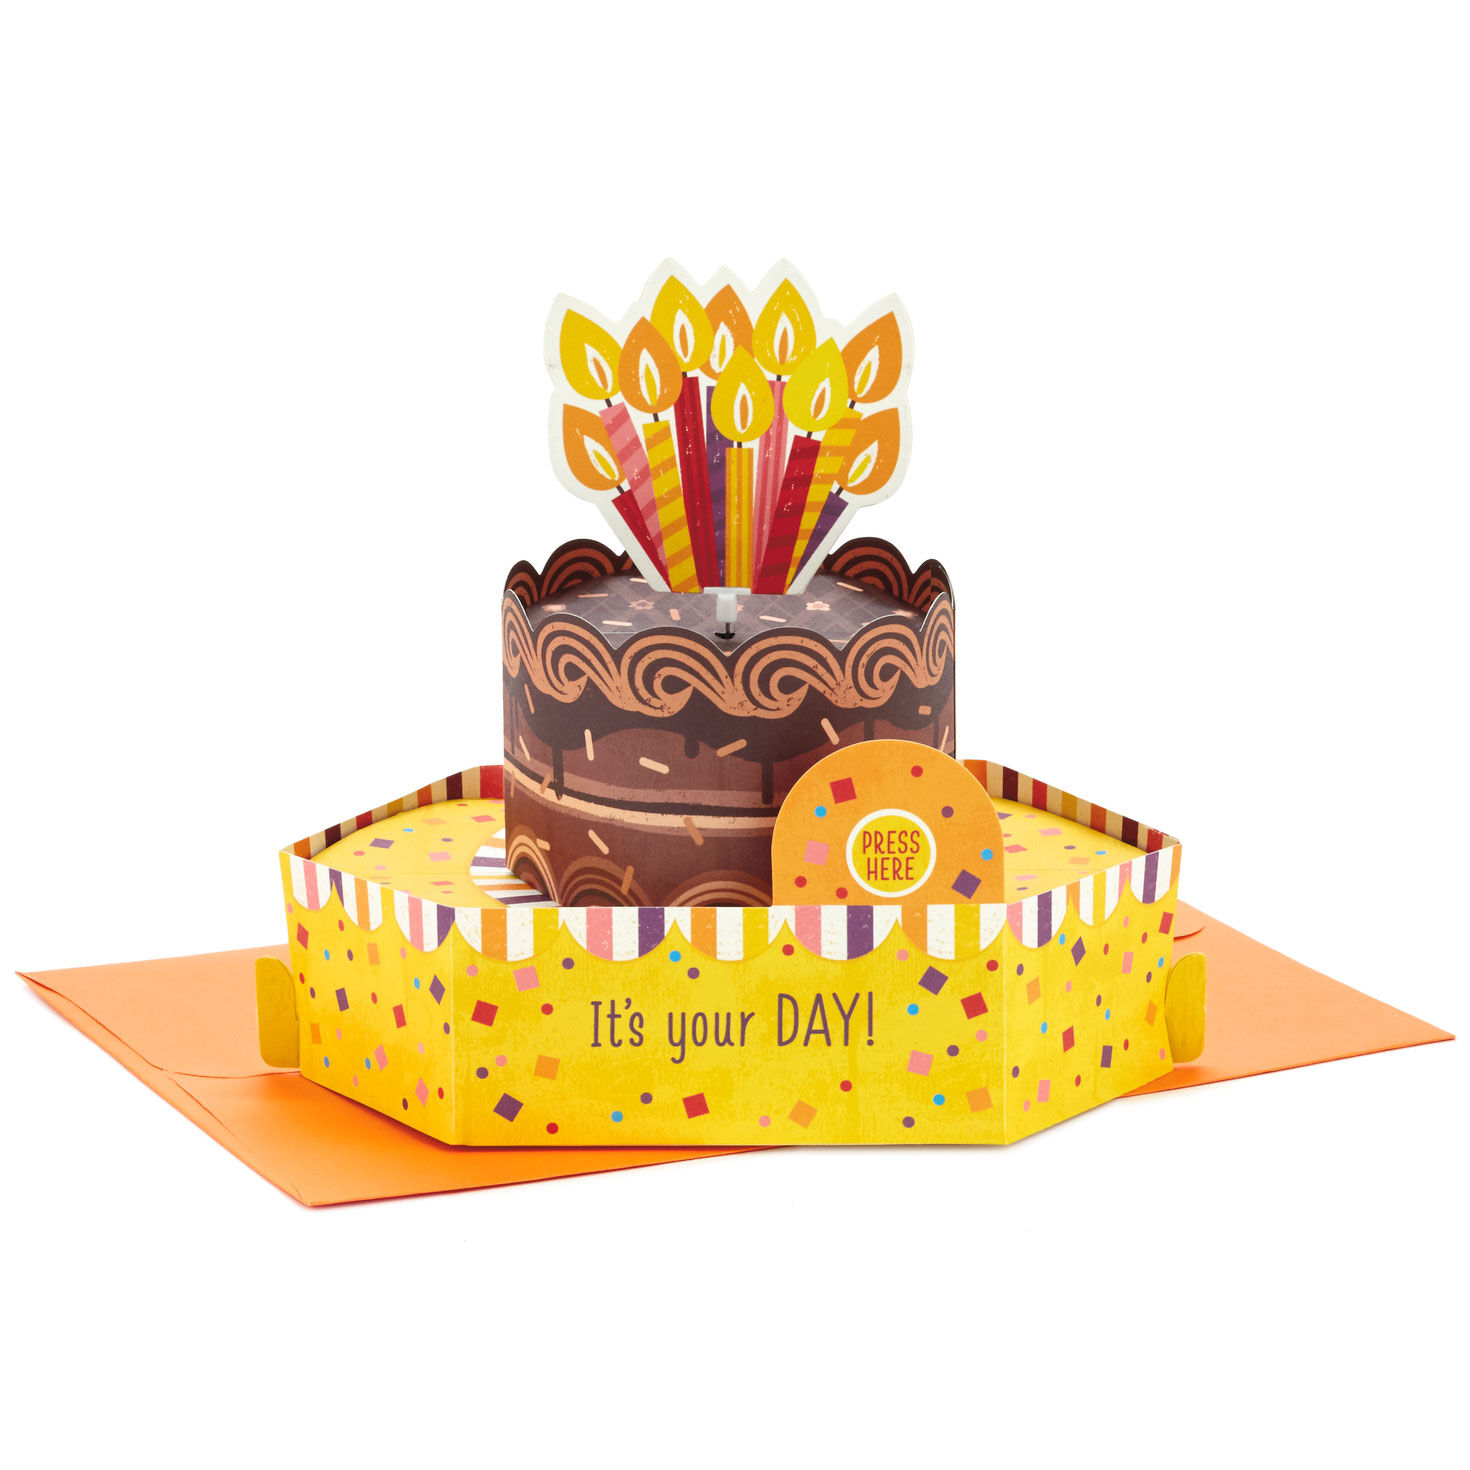 Chocolate Cake Musical 3D Pop-Up Birthday Card With Motion for only USD 11.99 | Hallmark